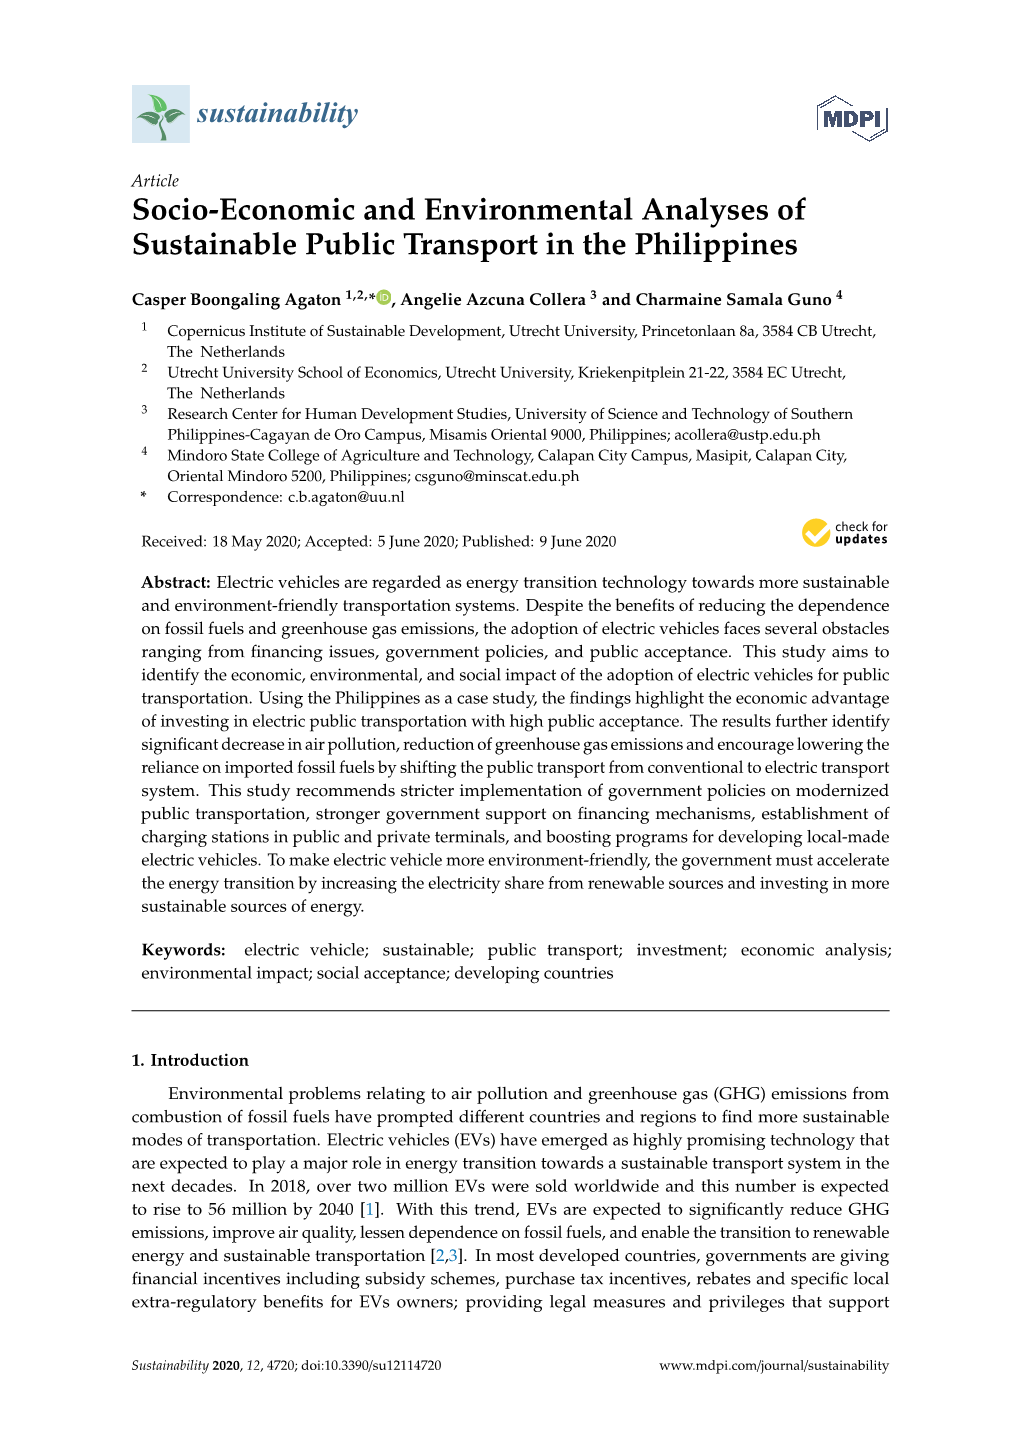 Socio-Economic and Environmental Analyses of Sustainable Public Transport in the Philippines